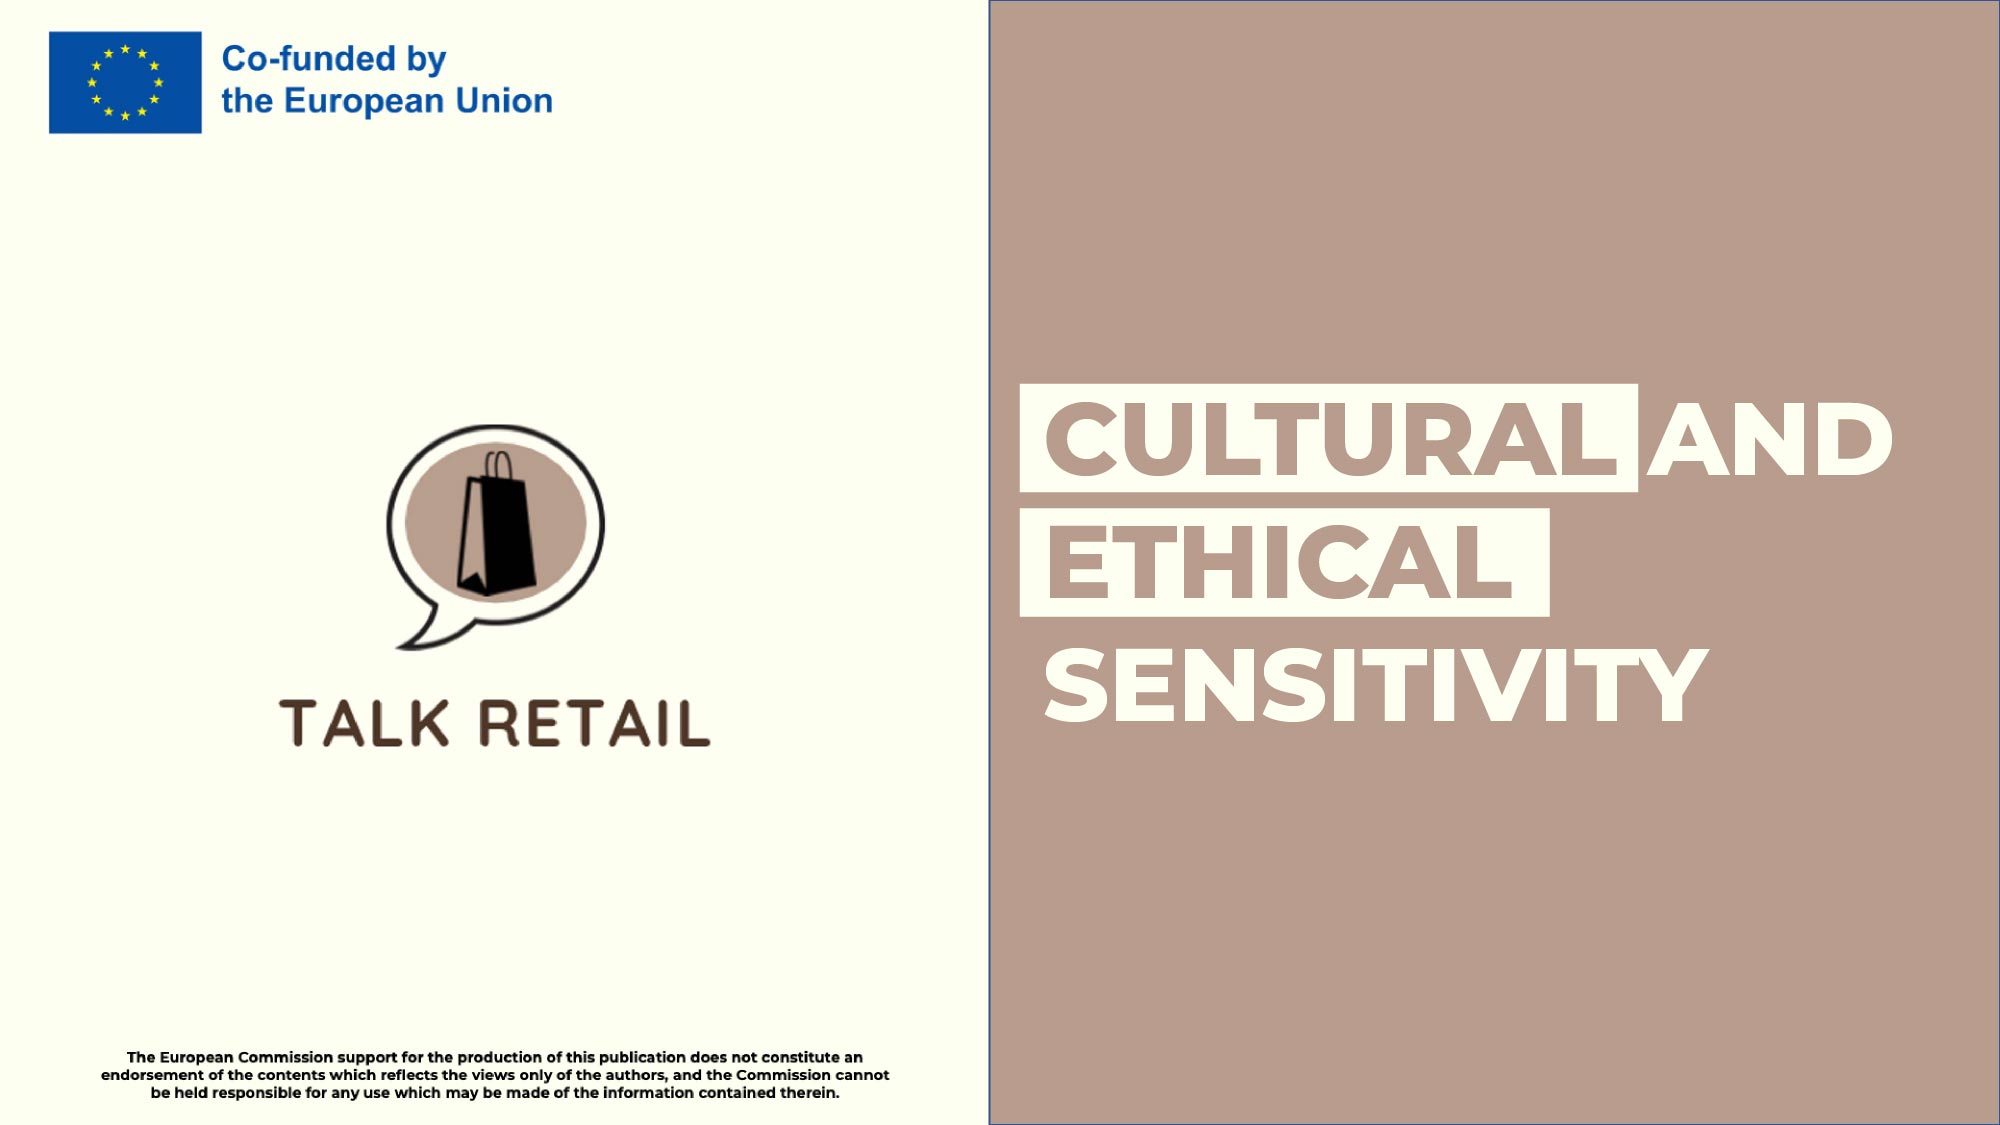 Course 4 - Cultural and ethical sensitivity